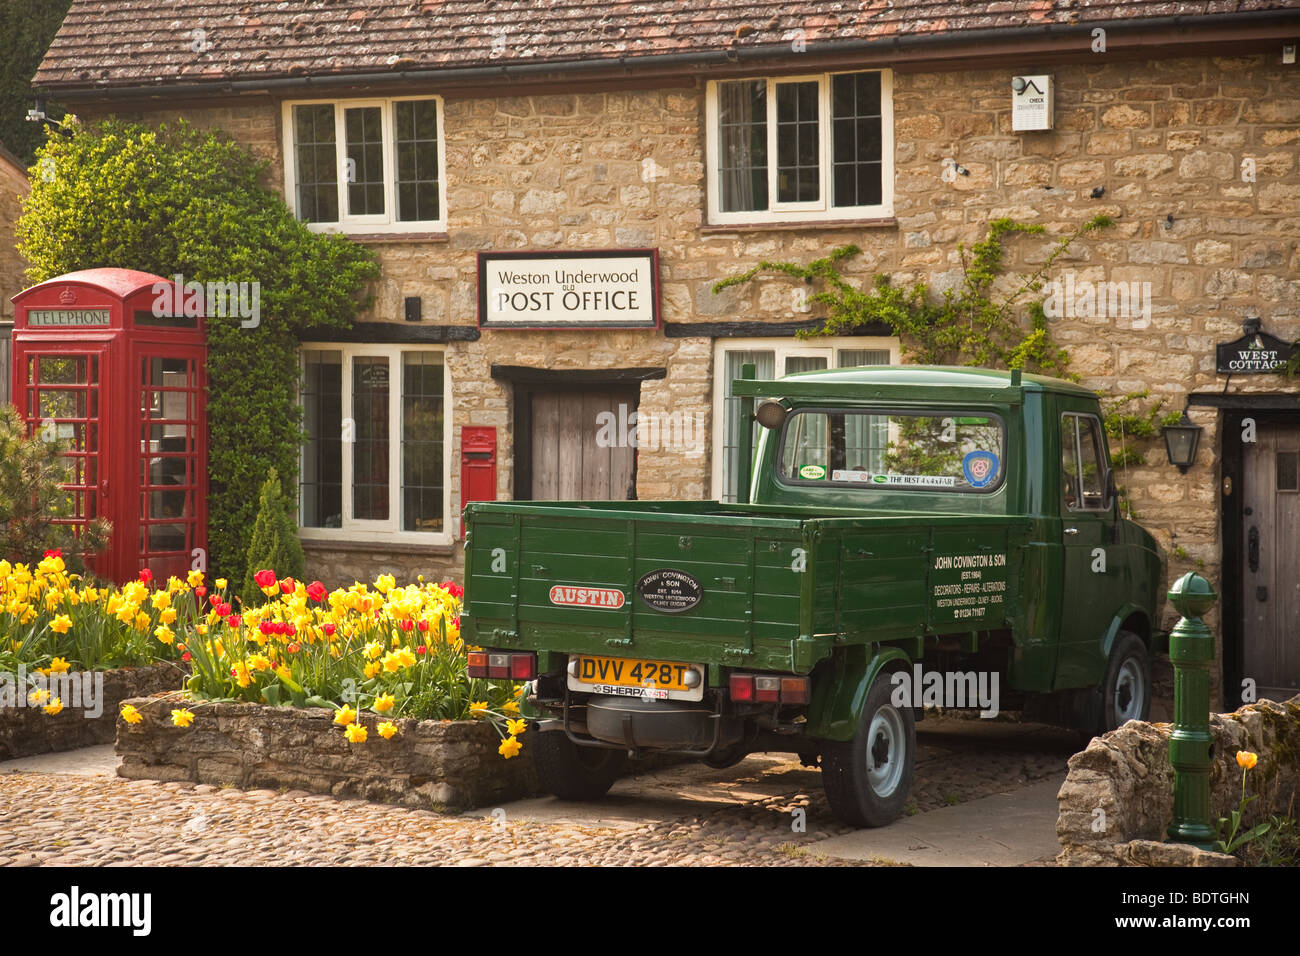 Old English county post office in the village of Weston Underwood with post box, telephone booth and old van Stock Photo